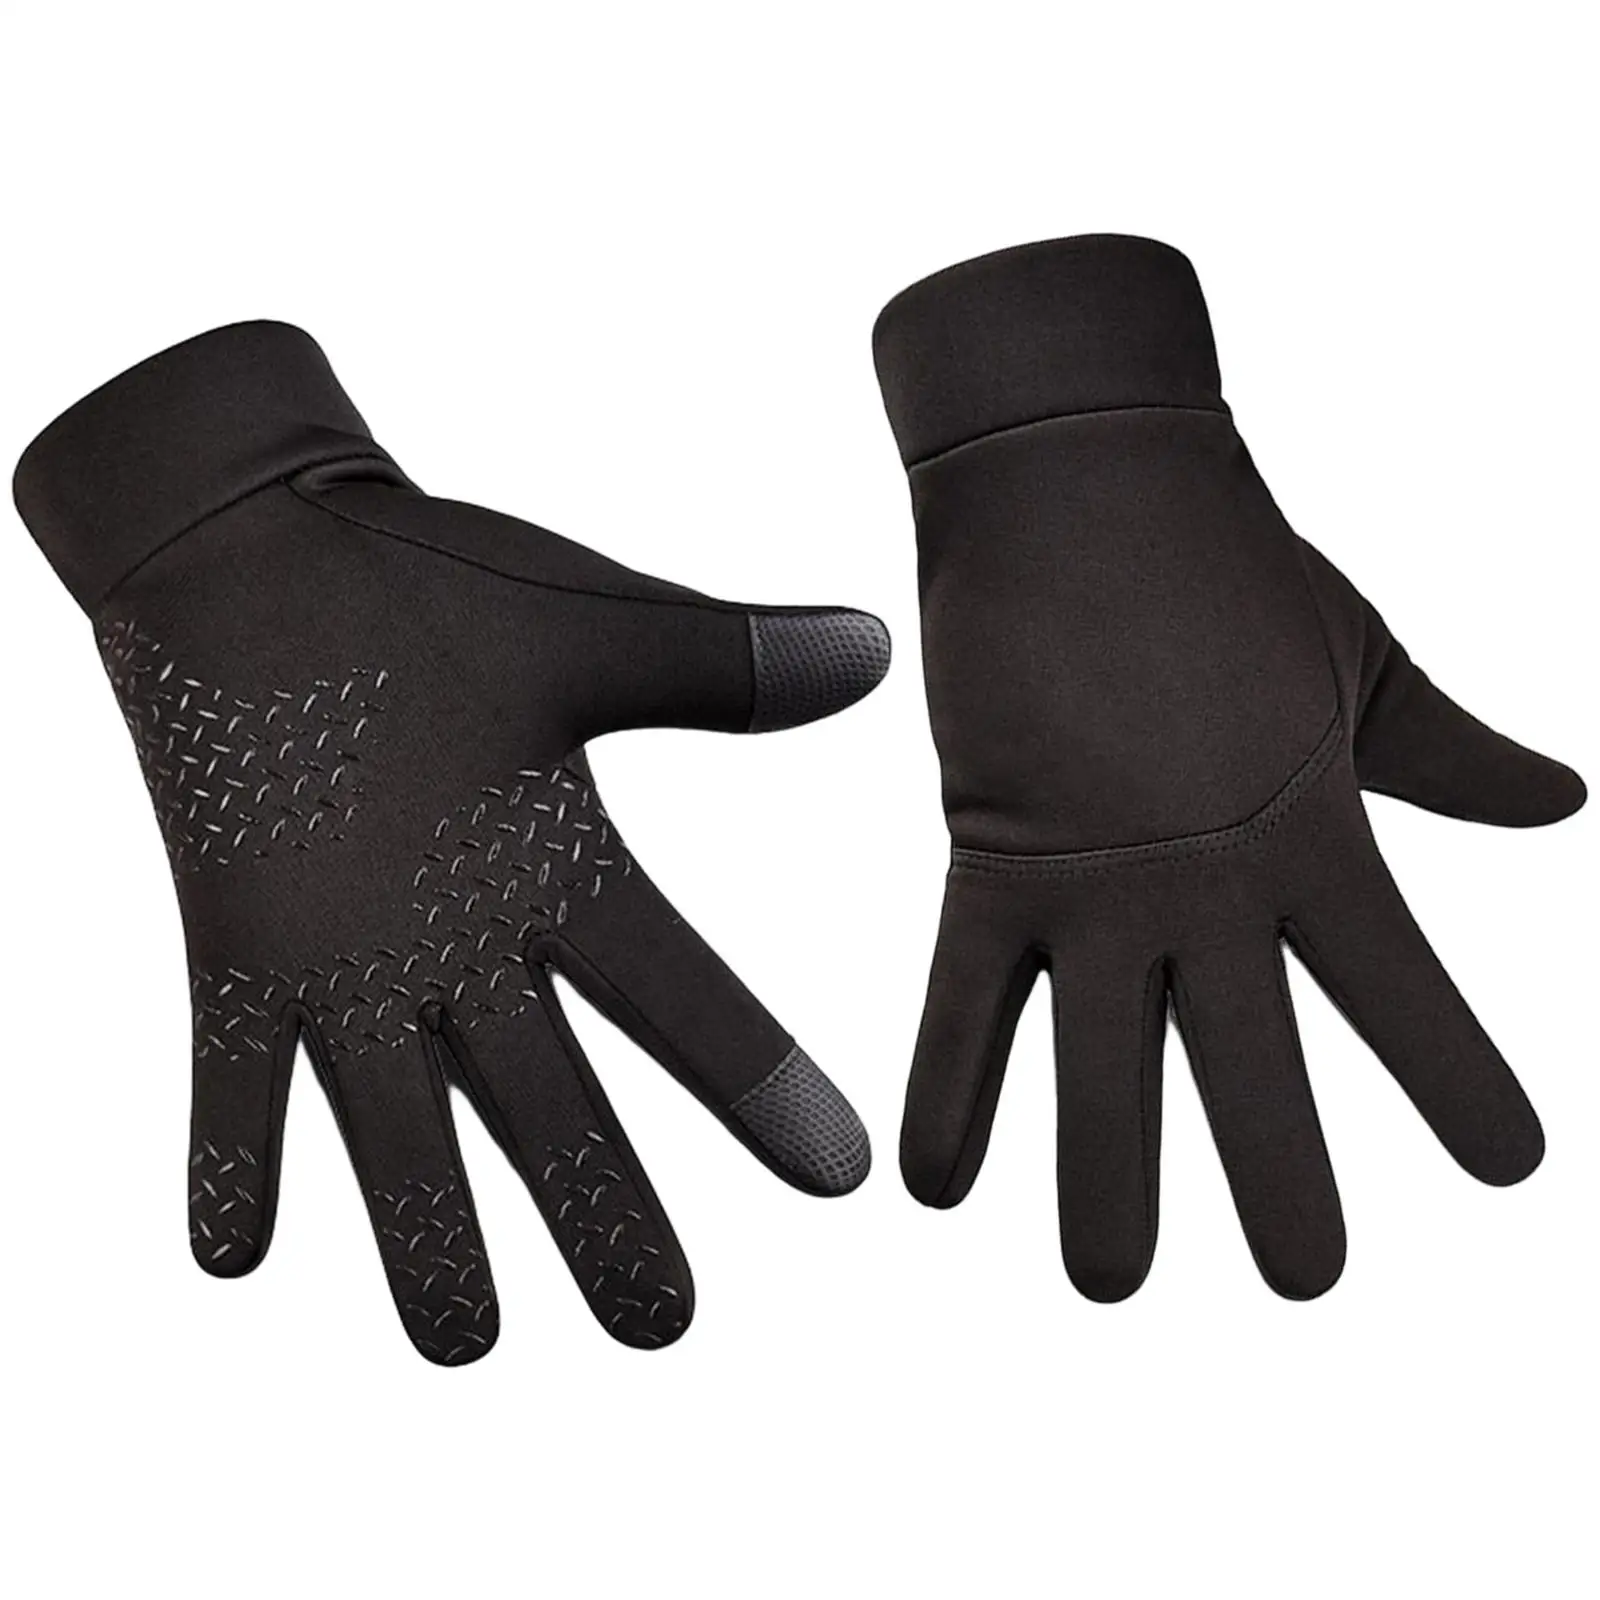 Waterproof Winter Gloves, Bicycle Sports Mittens ,Comfortable Full Finger Riding